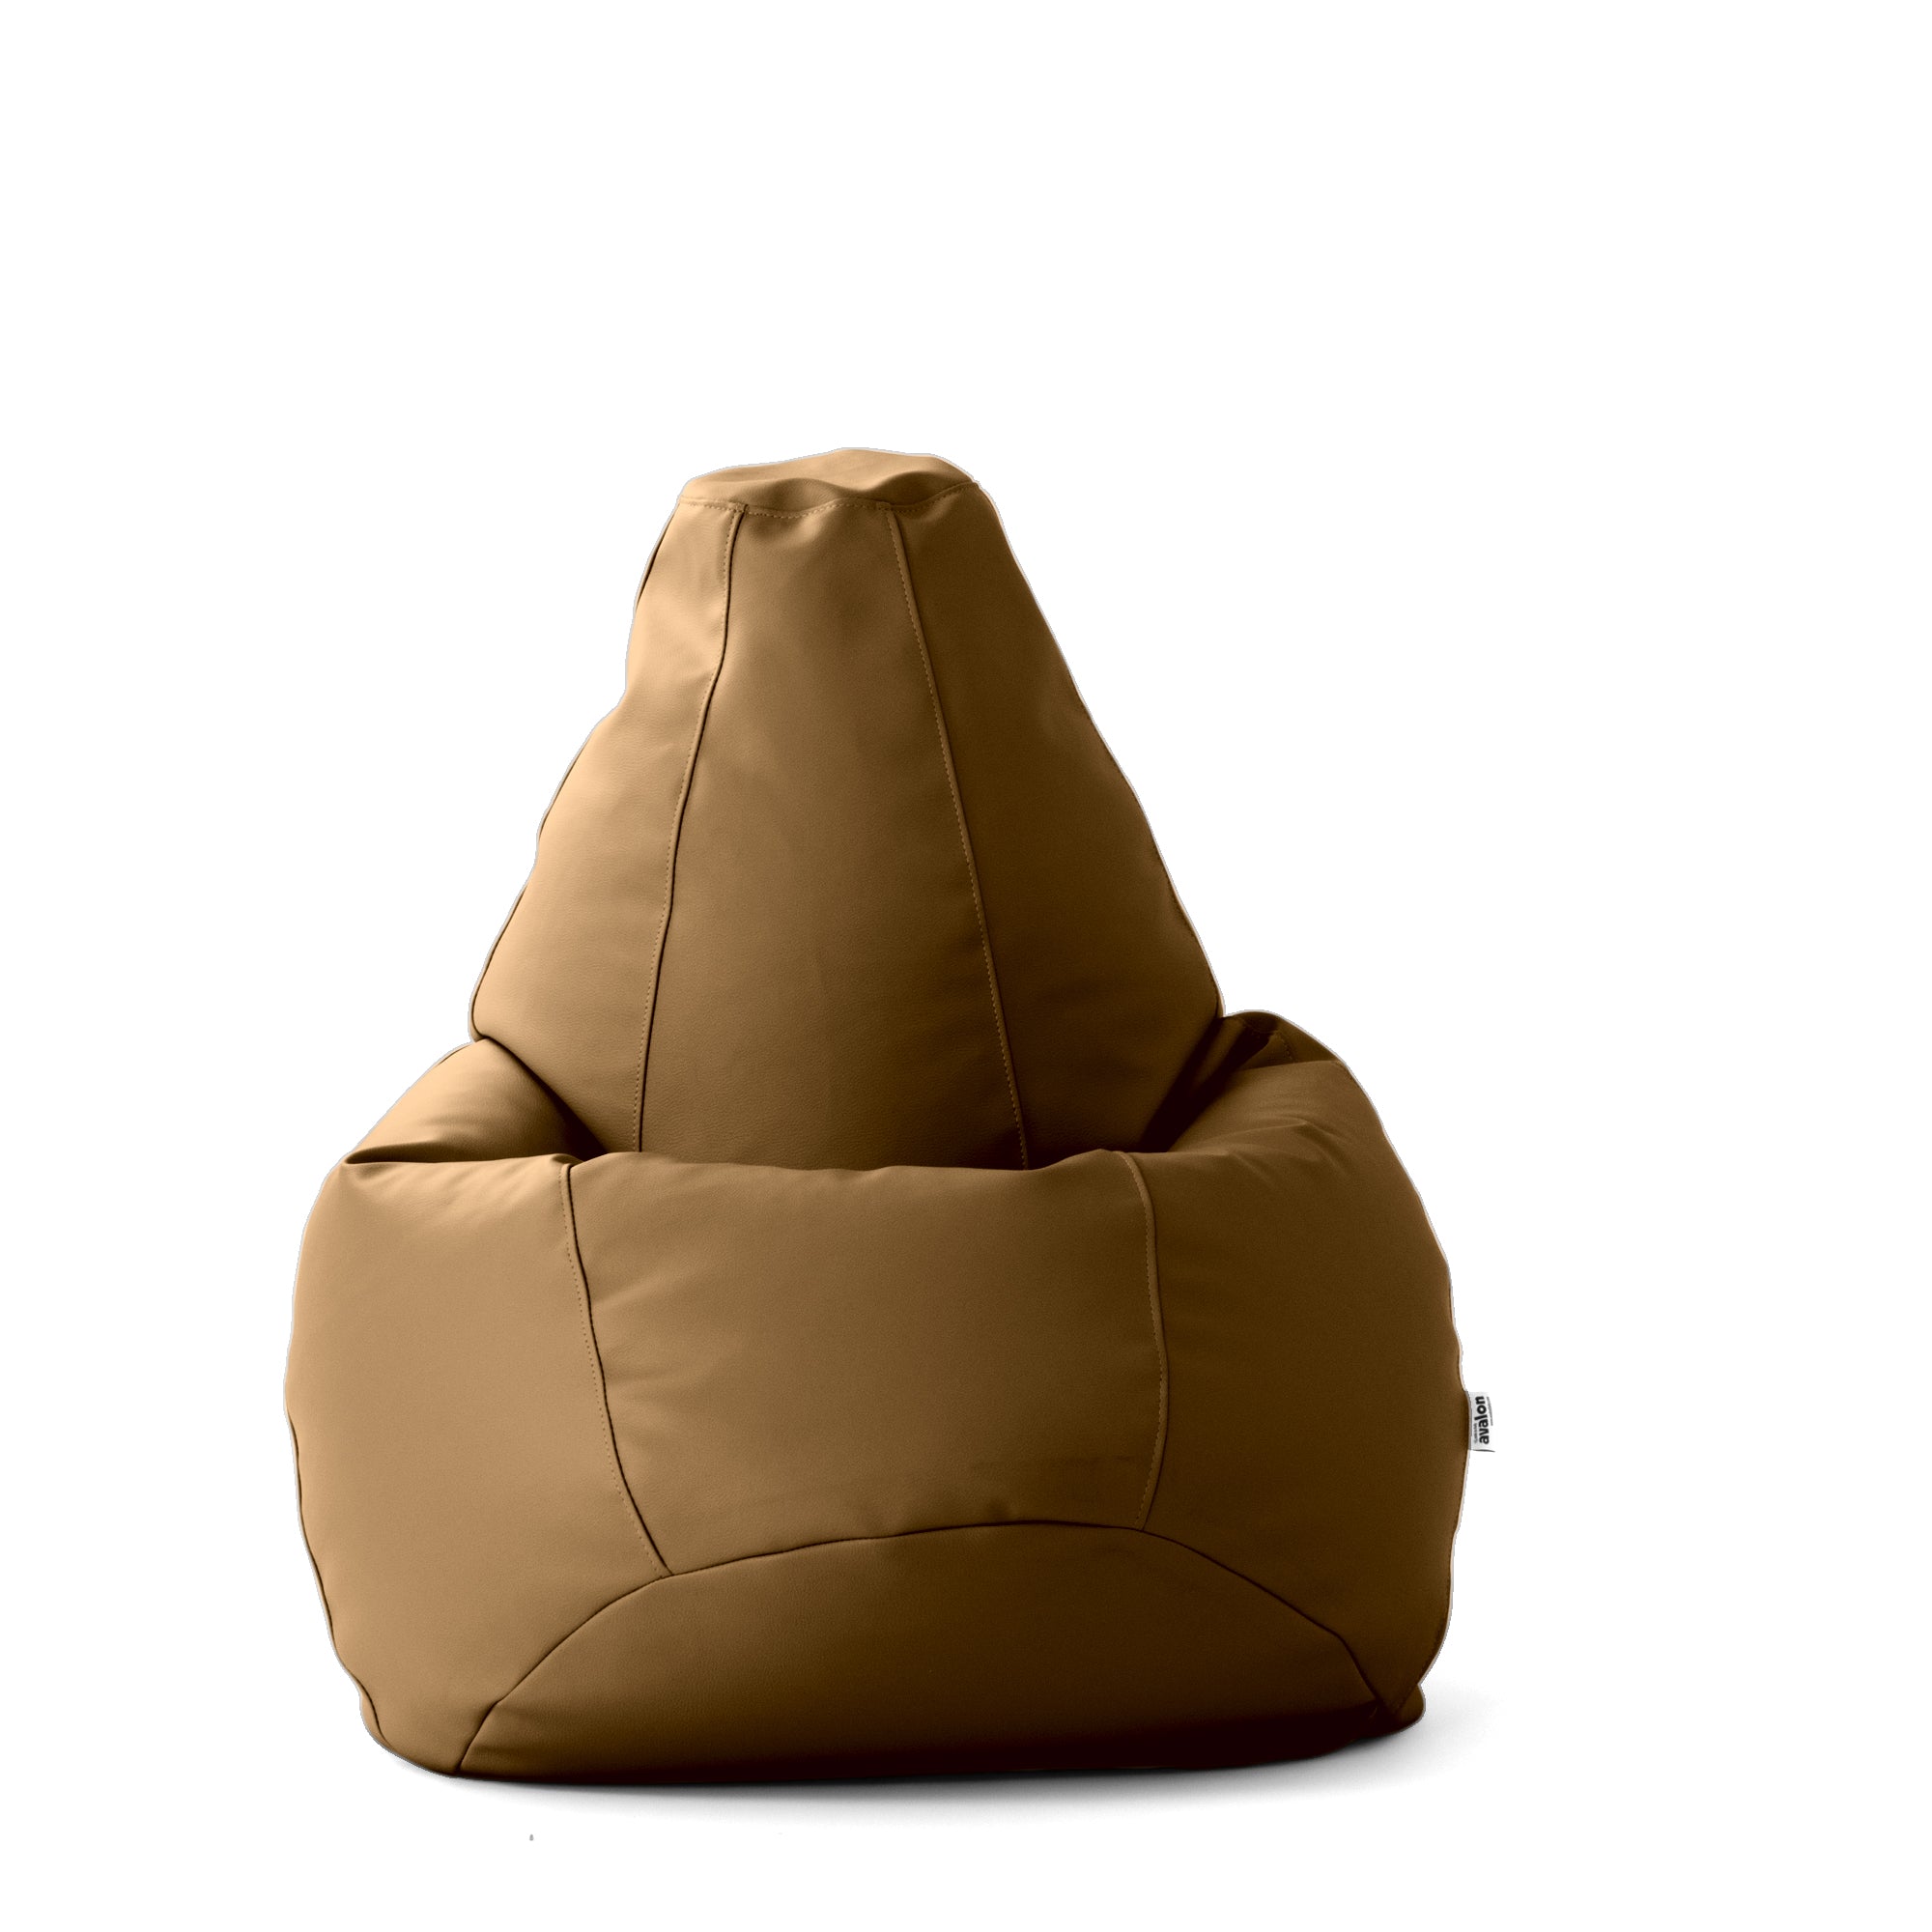 Discounted - Pouf Armchair Sacco Grande BAG L Mamba leatherette dim. 80 x  125 cm - For internal and external environments